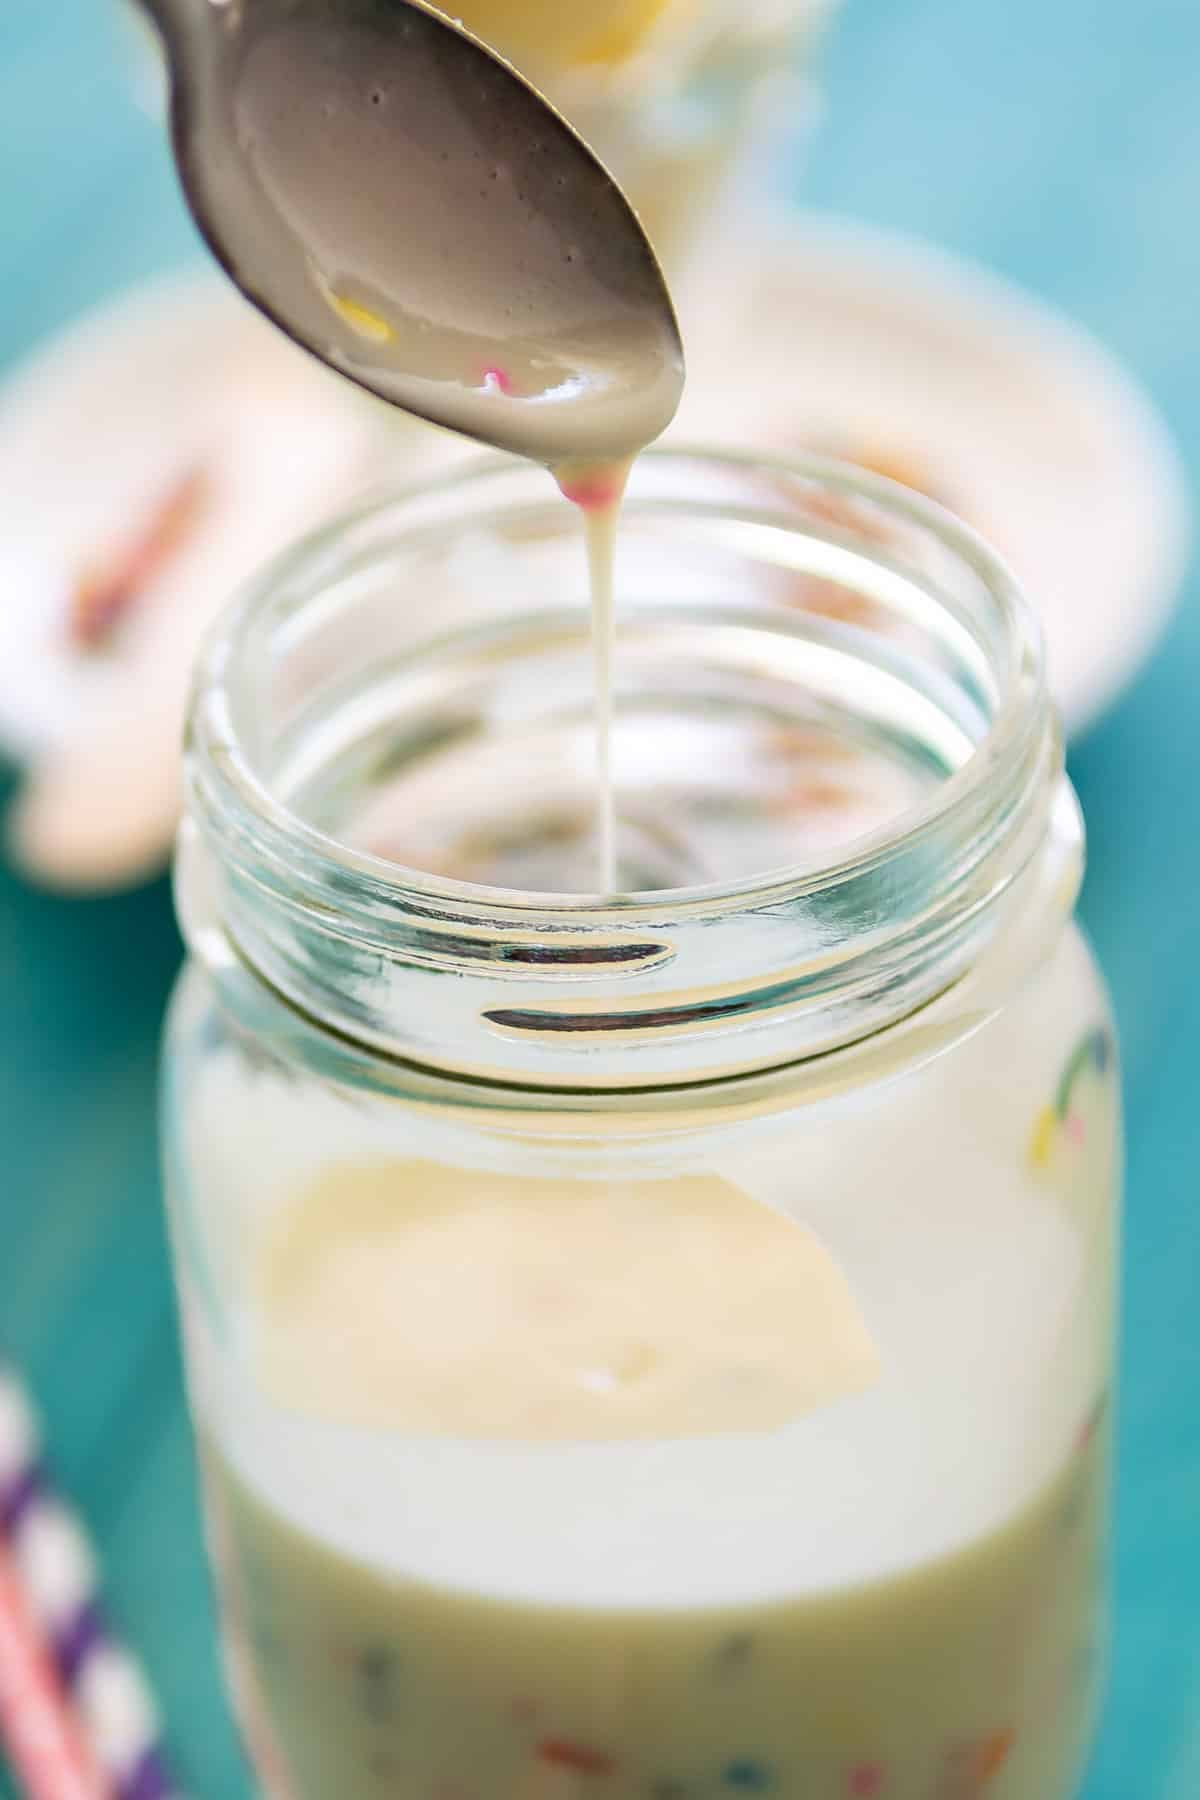 magic shell in a clear mason jar being scooped with a spoon.